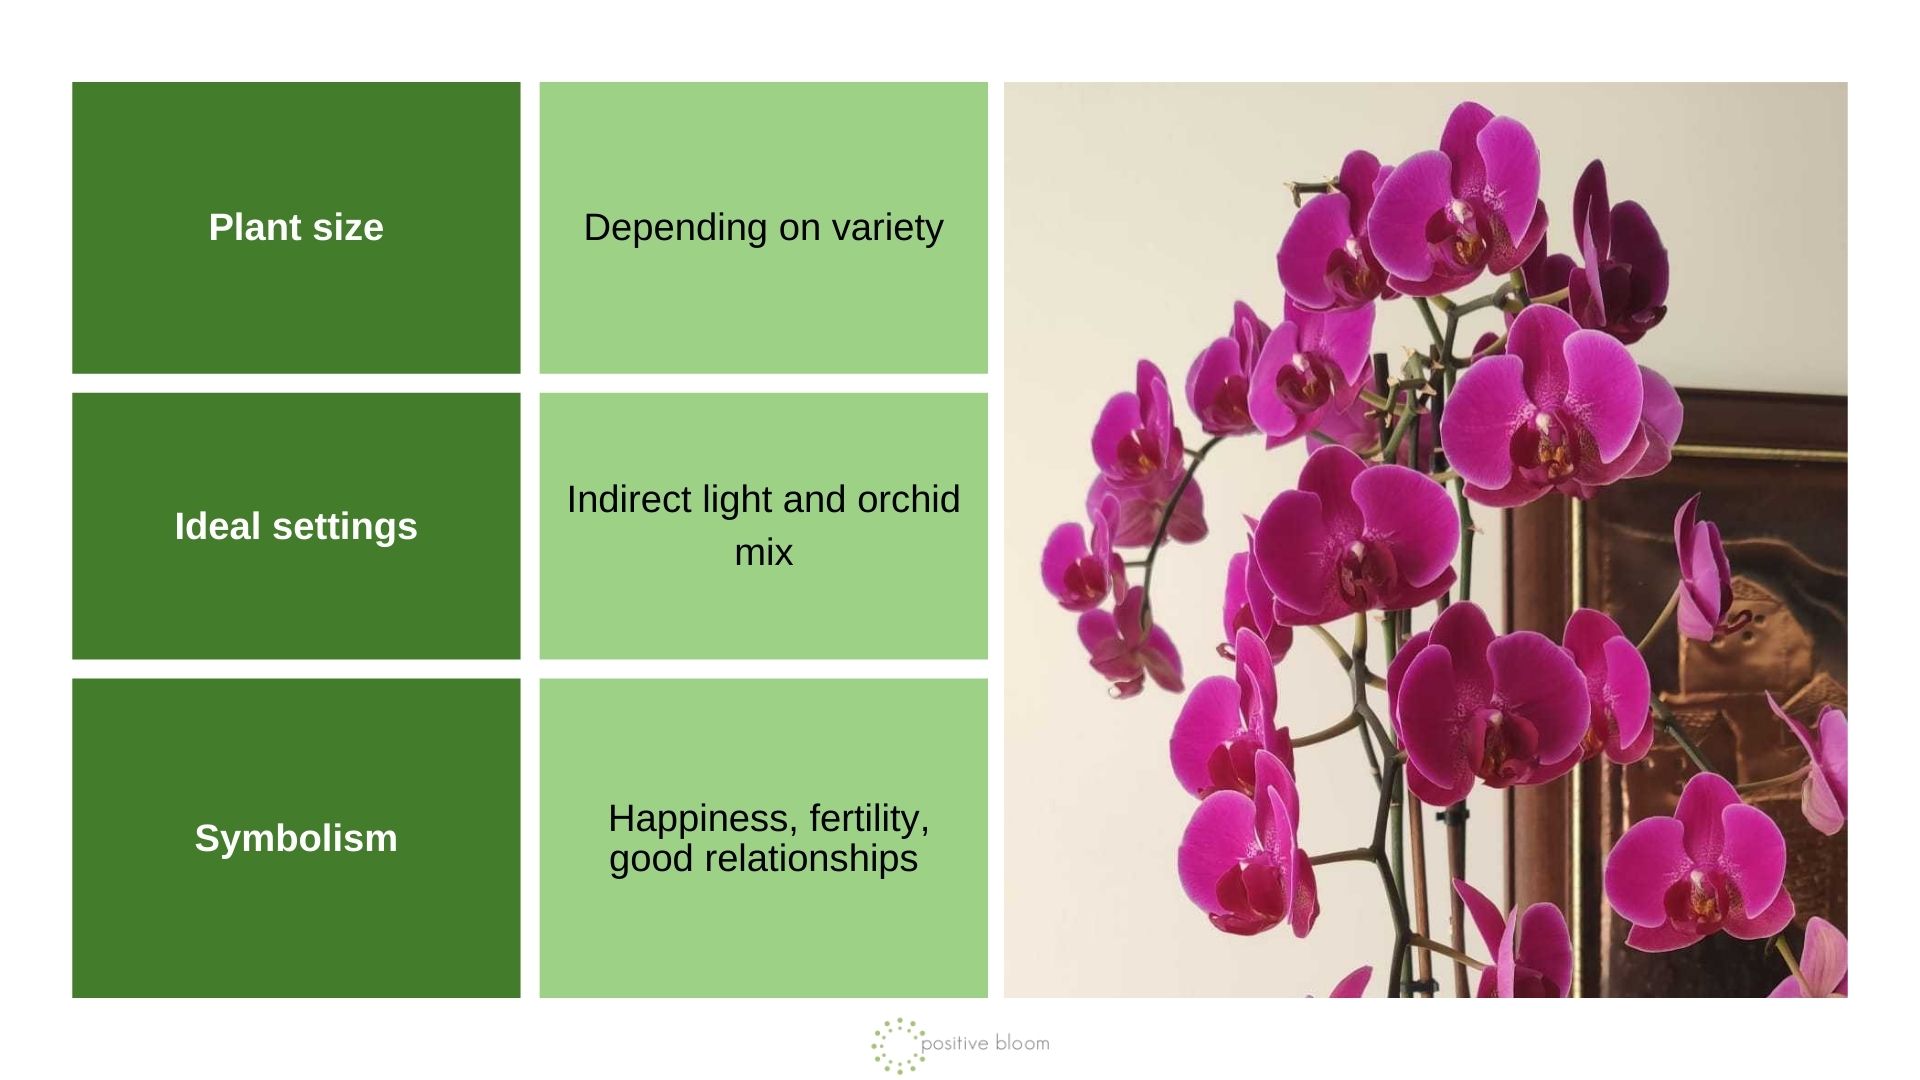 Orchids info chart and photo